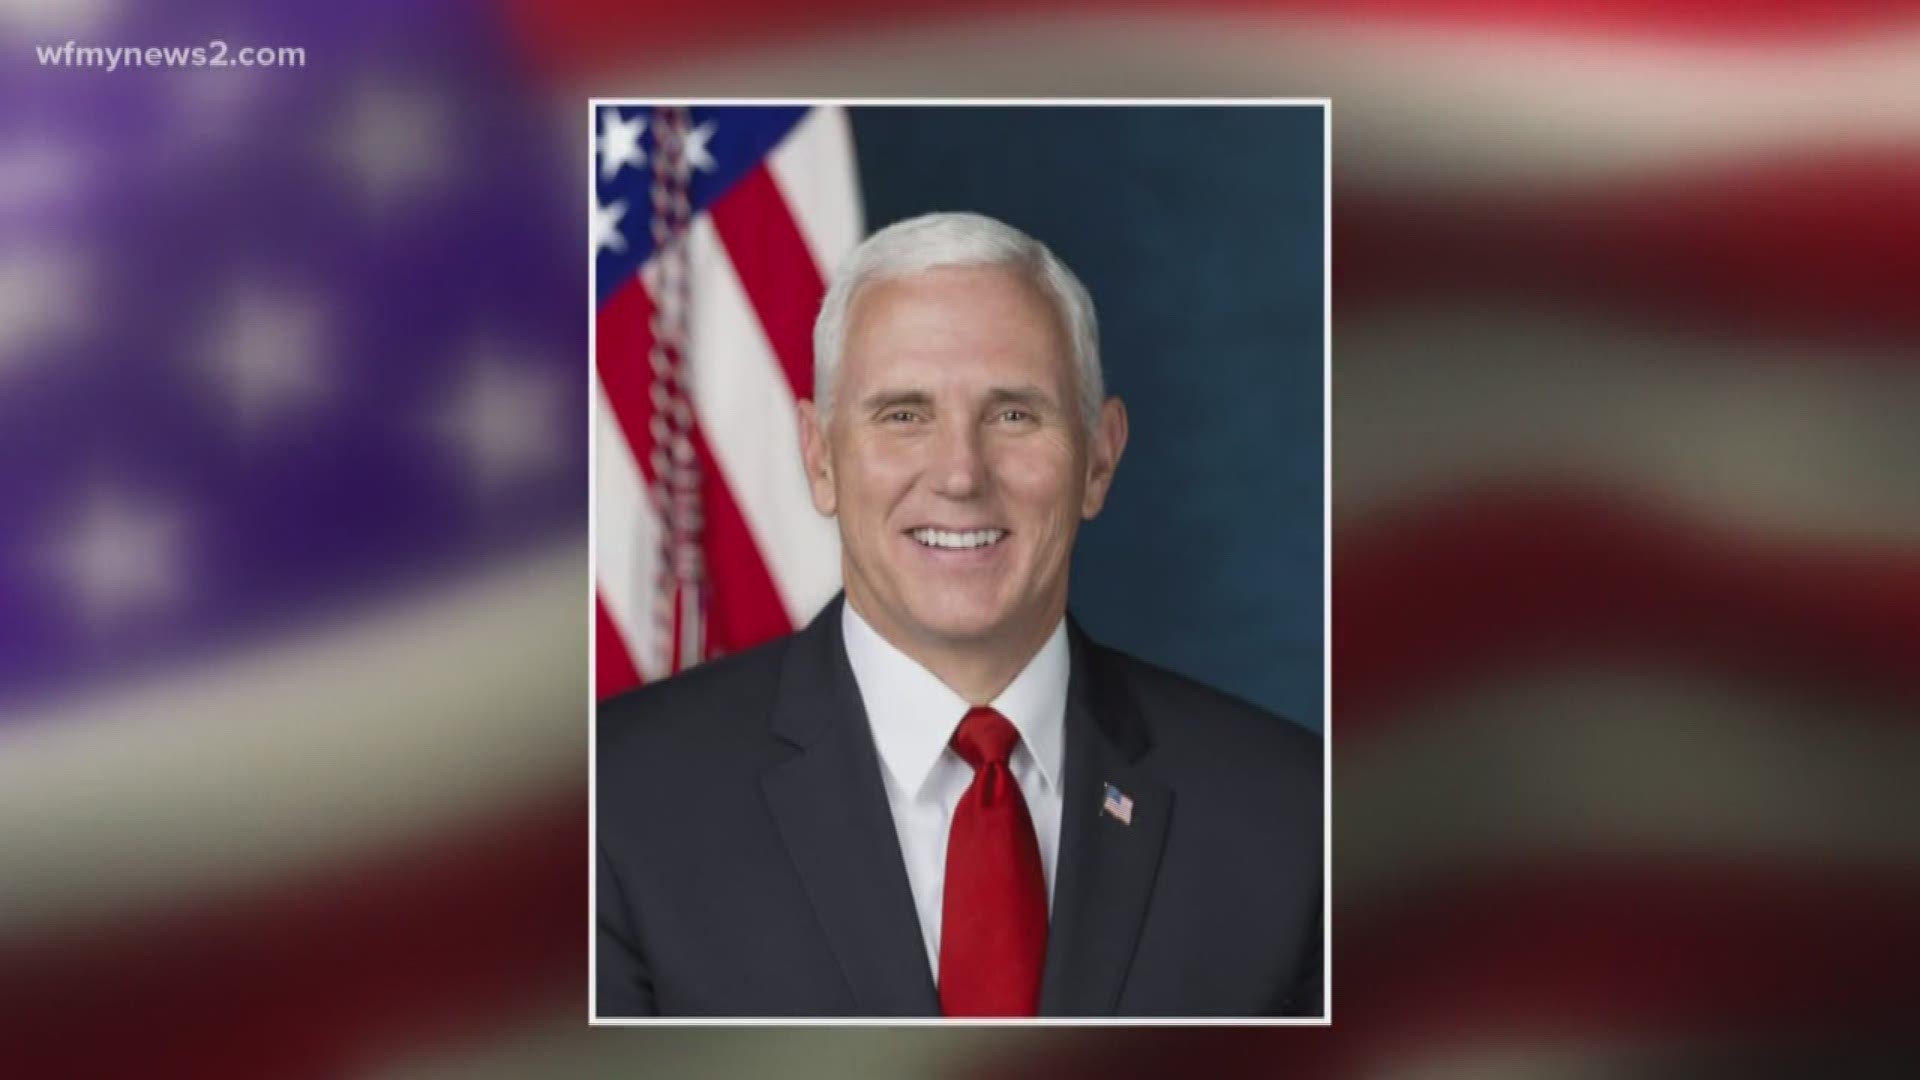 Vice President Mike Pence is in town for a fundraiser involving Senator Thom Tillis. 
The event is private with no cameras allowed in, but all kinds of people came out hoping to catch a glimpse of the vice-president on his way inside.